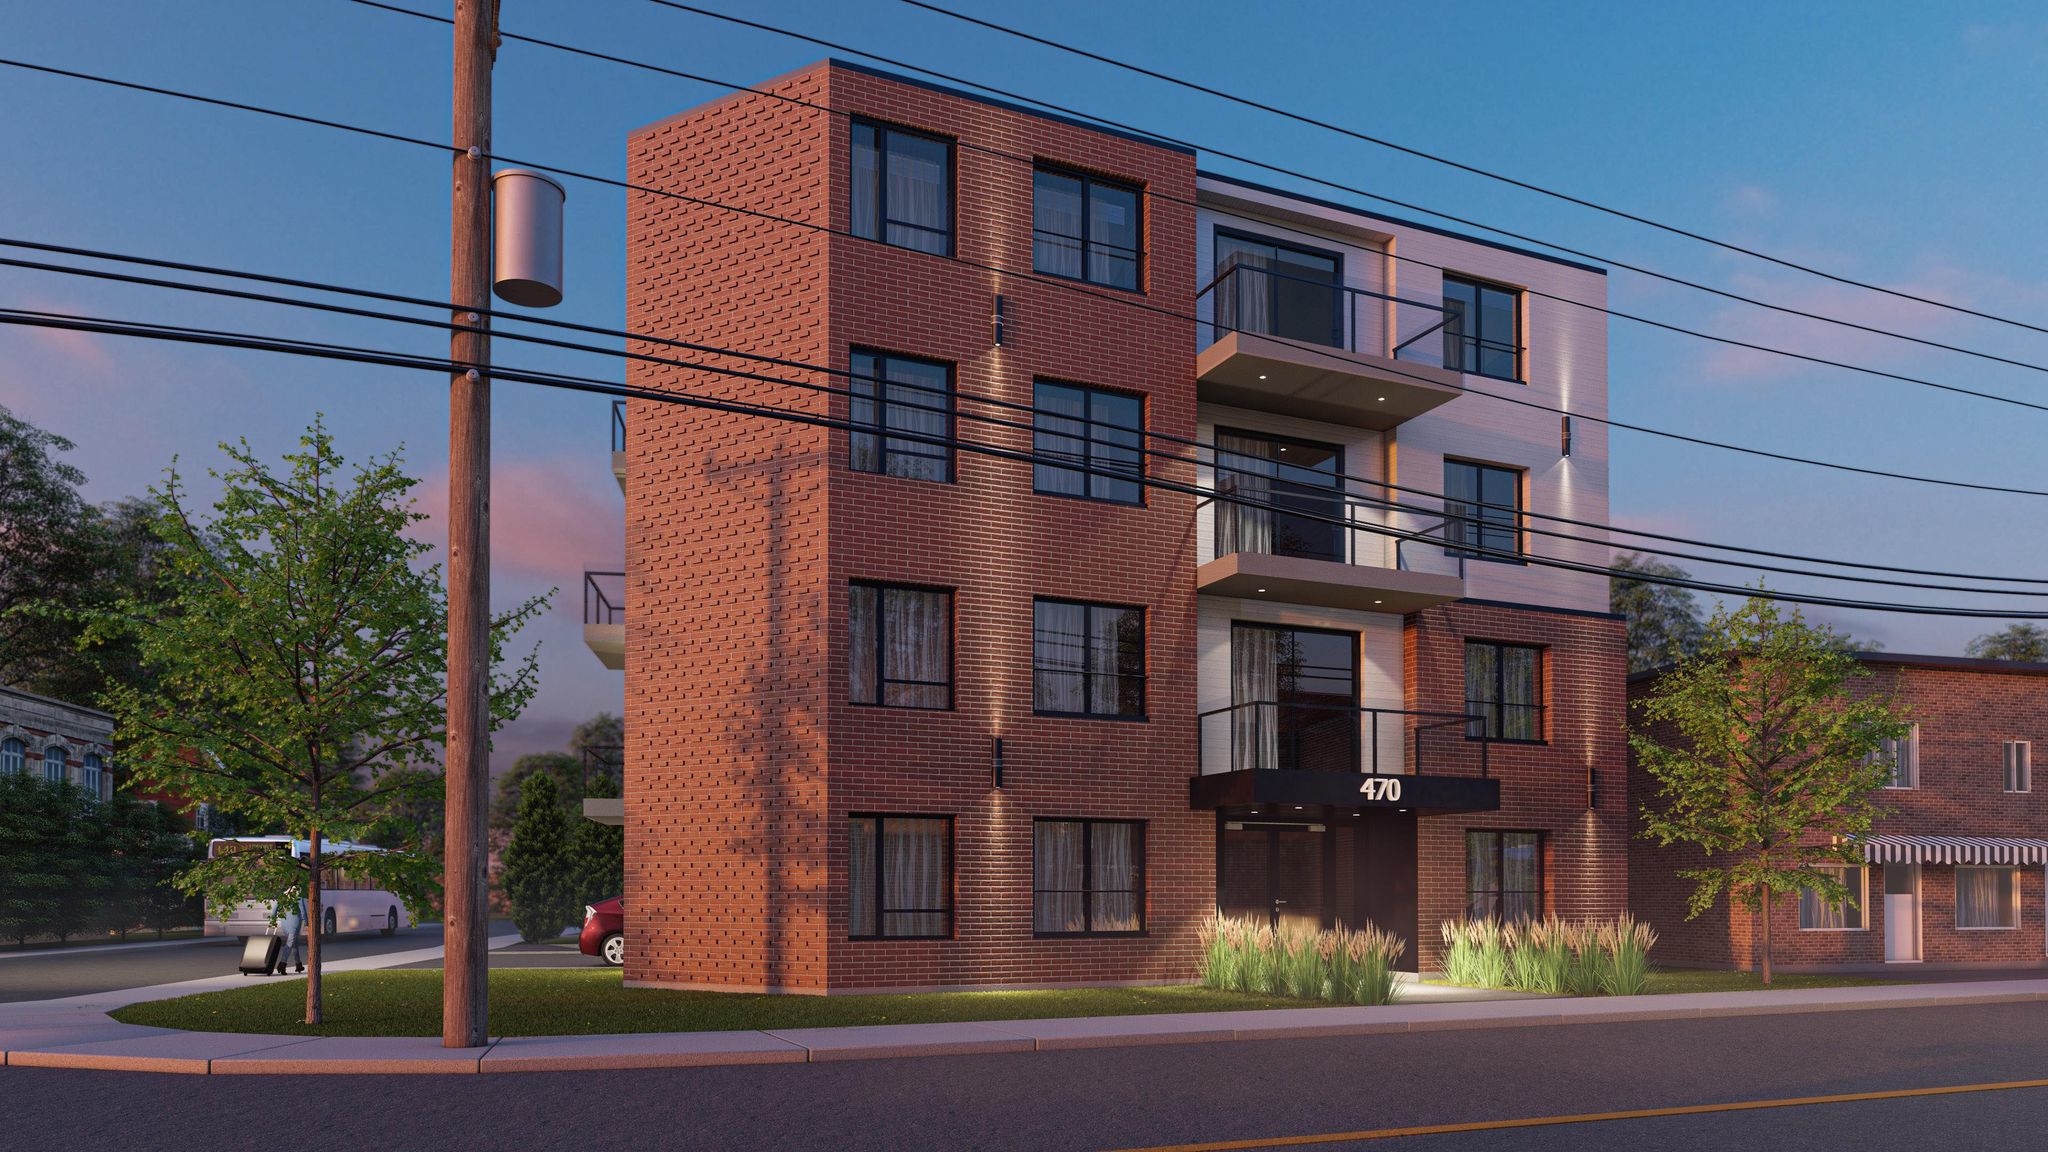 A 14 unit rental project in Lachine